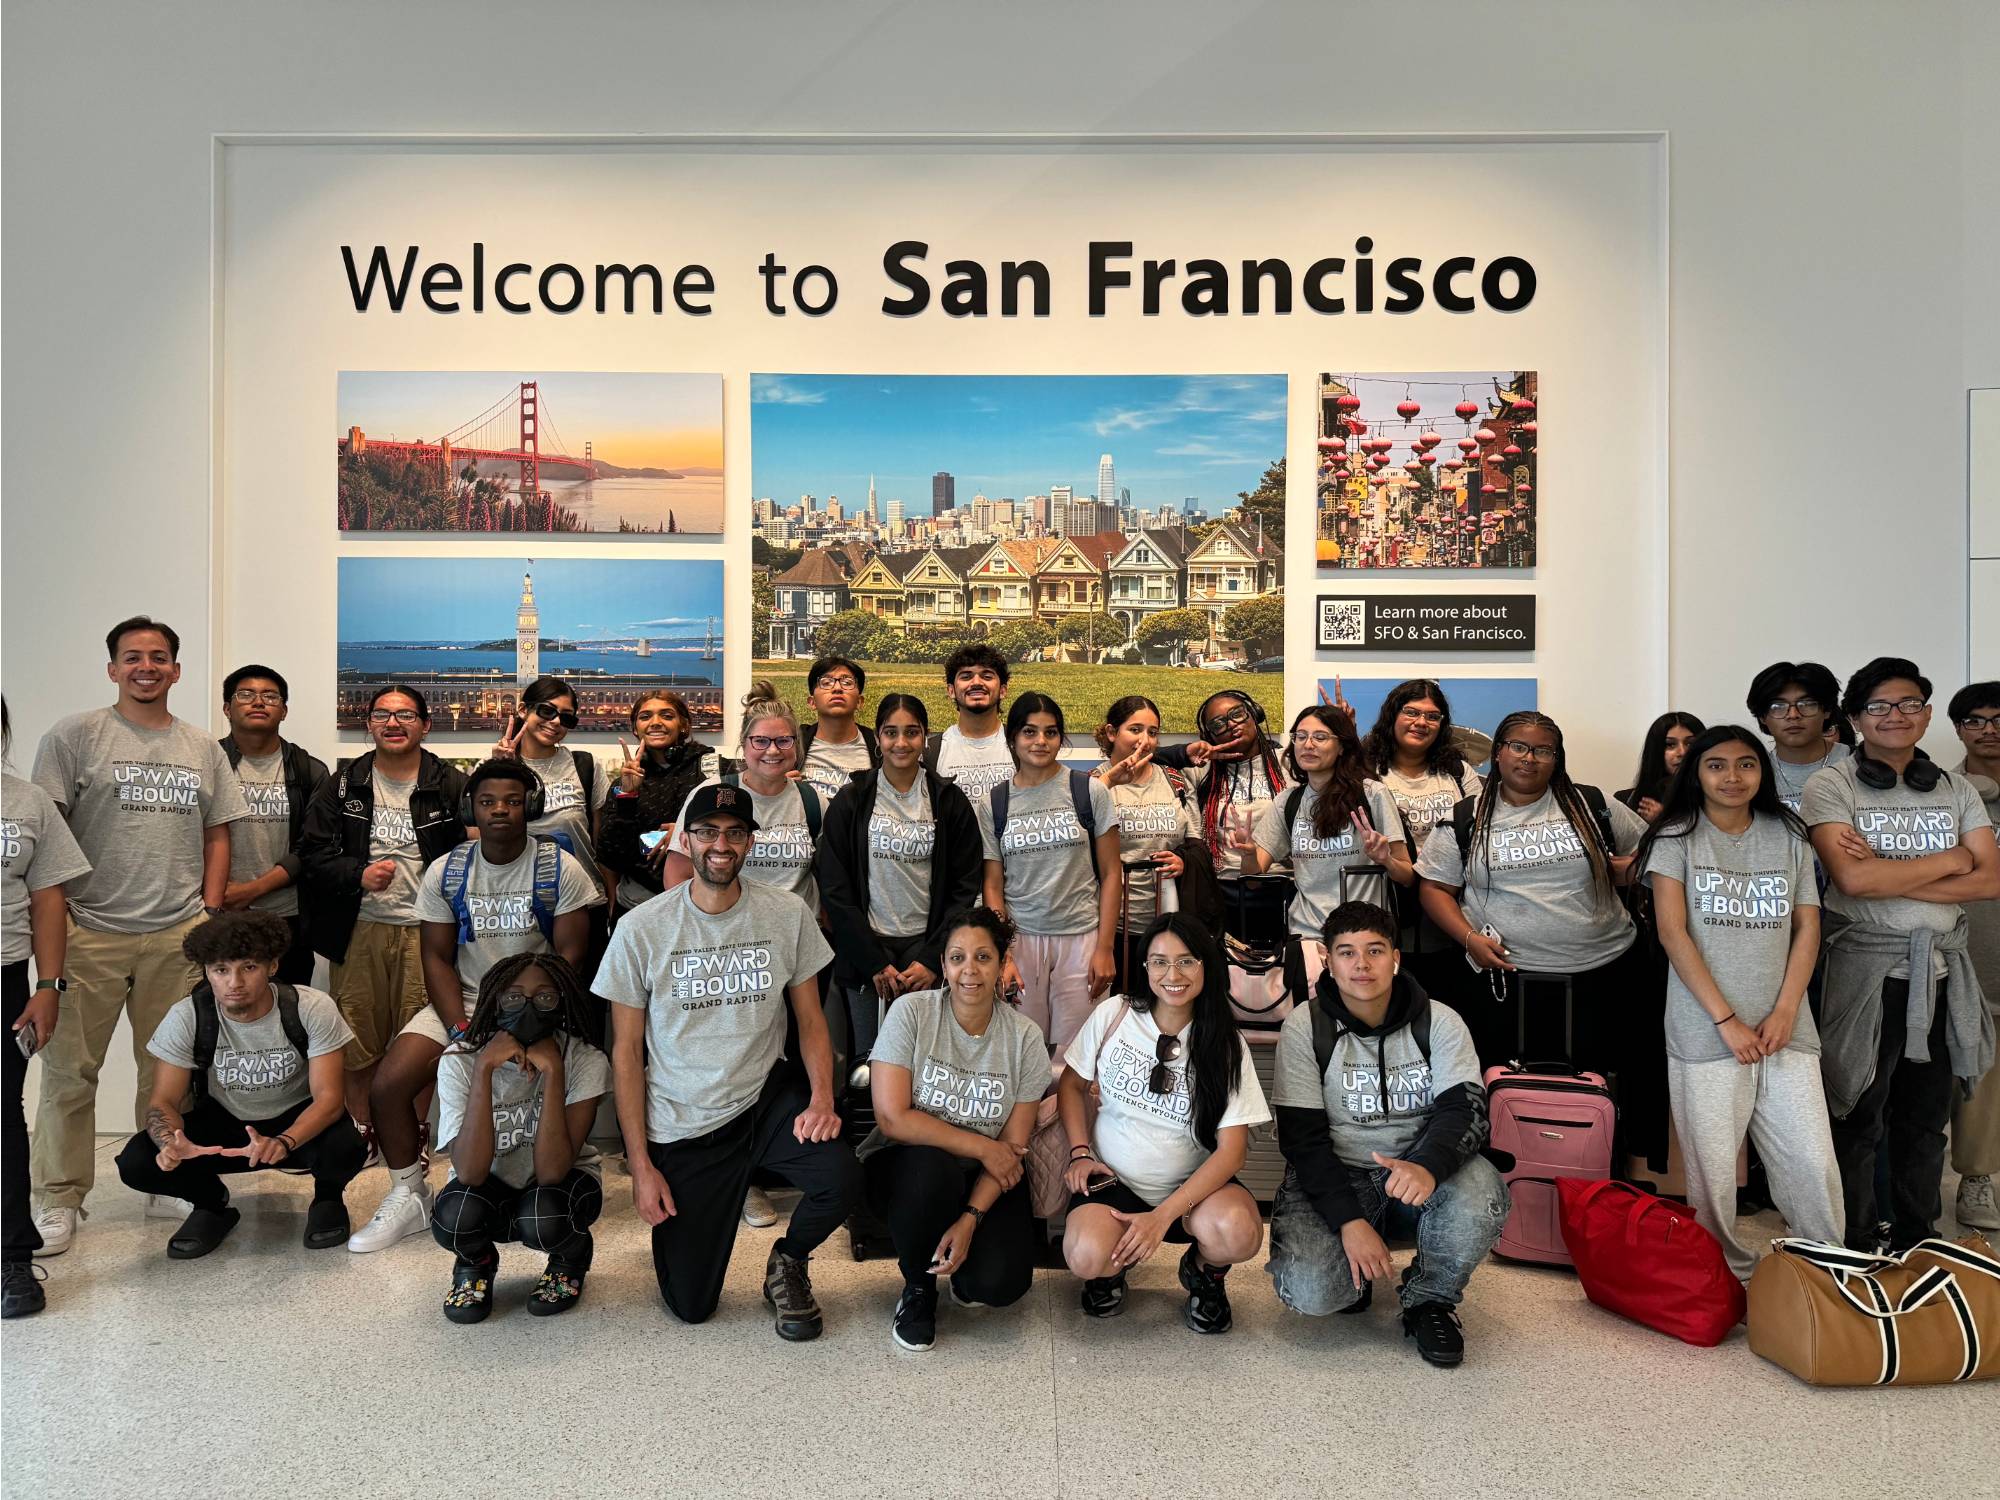 group photo of students and staff in front of San Francisco sign